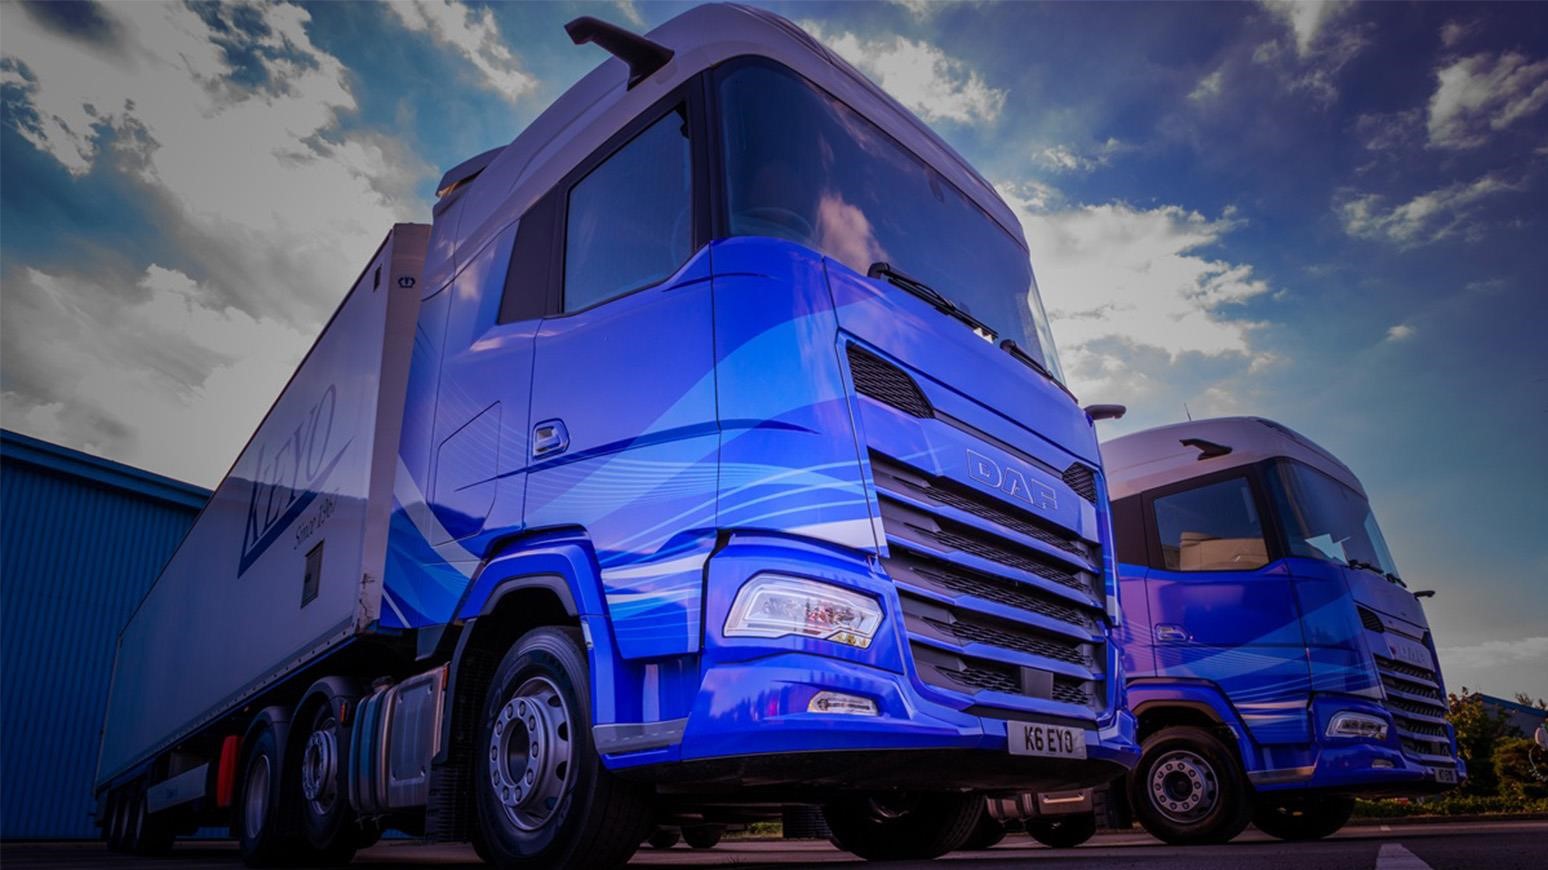 Keyo Buys 2 New Daf Tractor Units, Then Orders 2 More